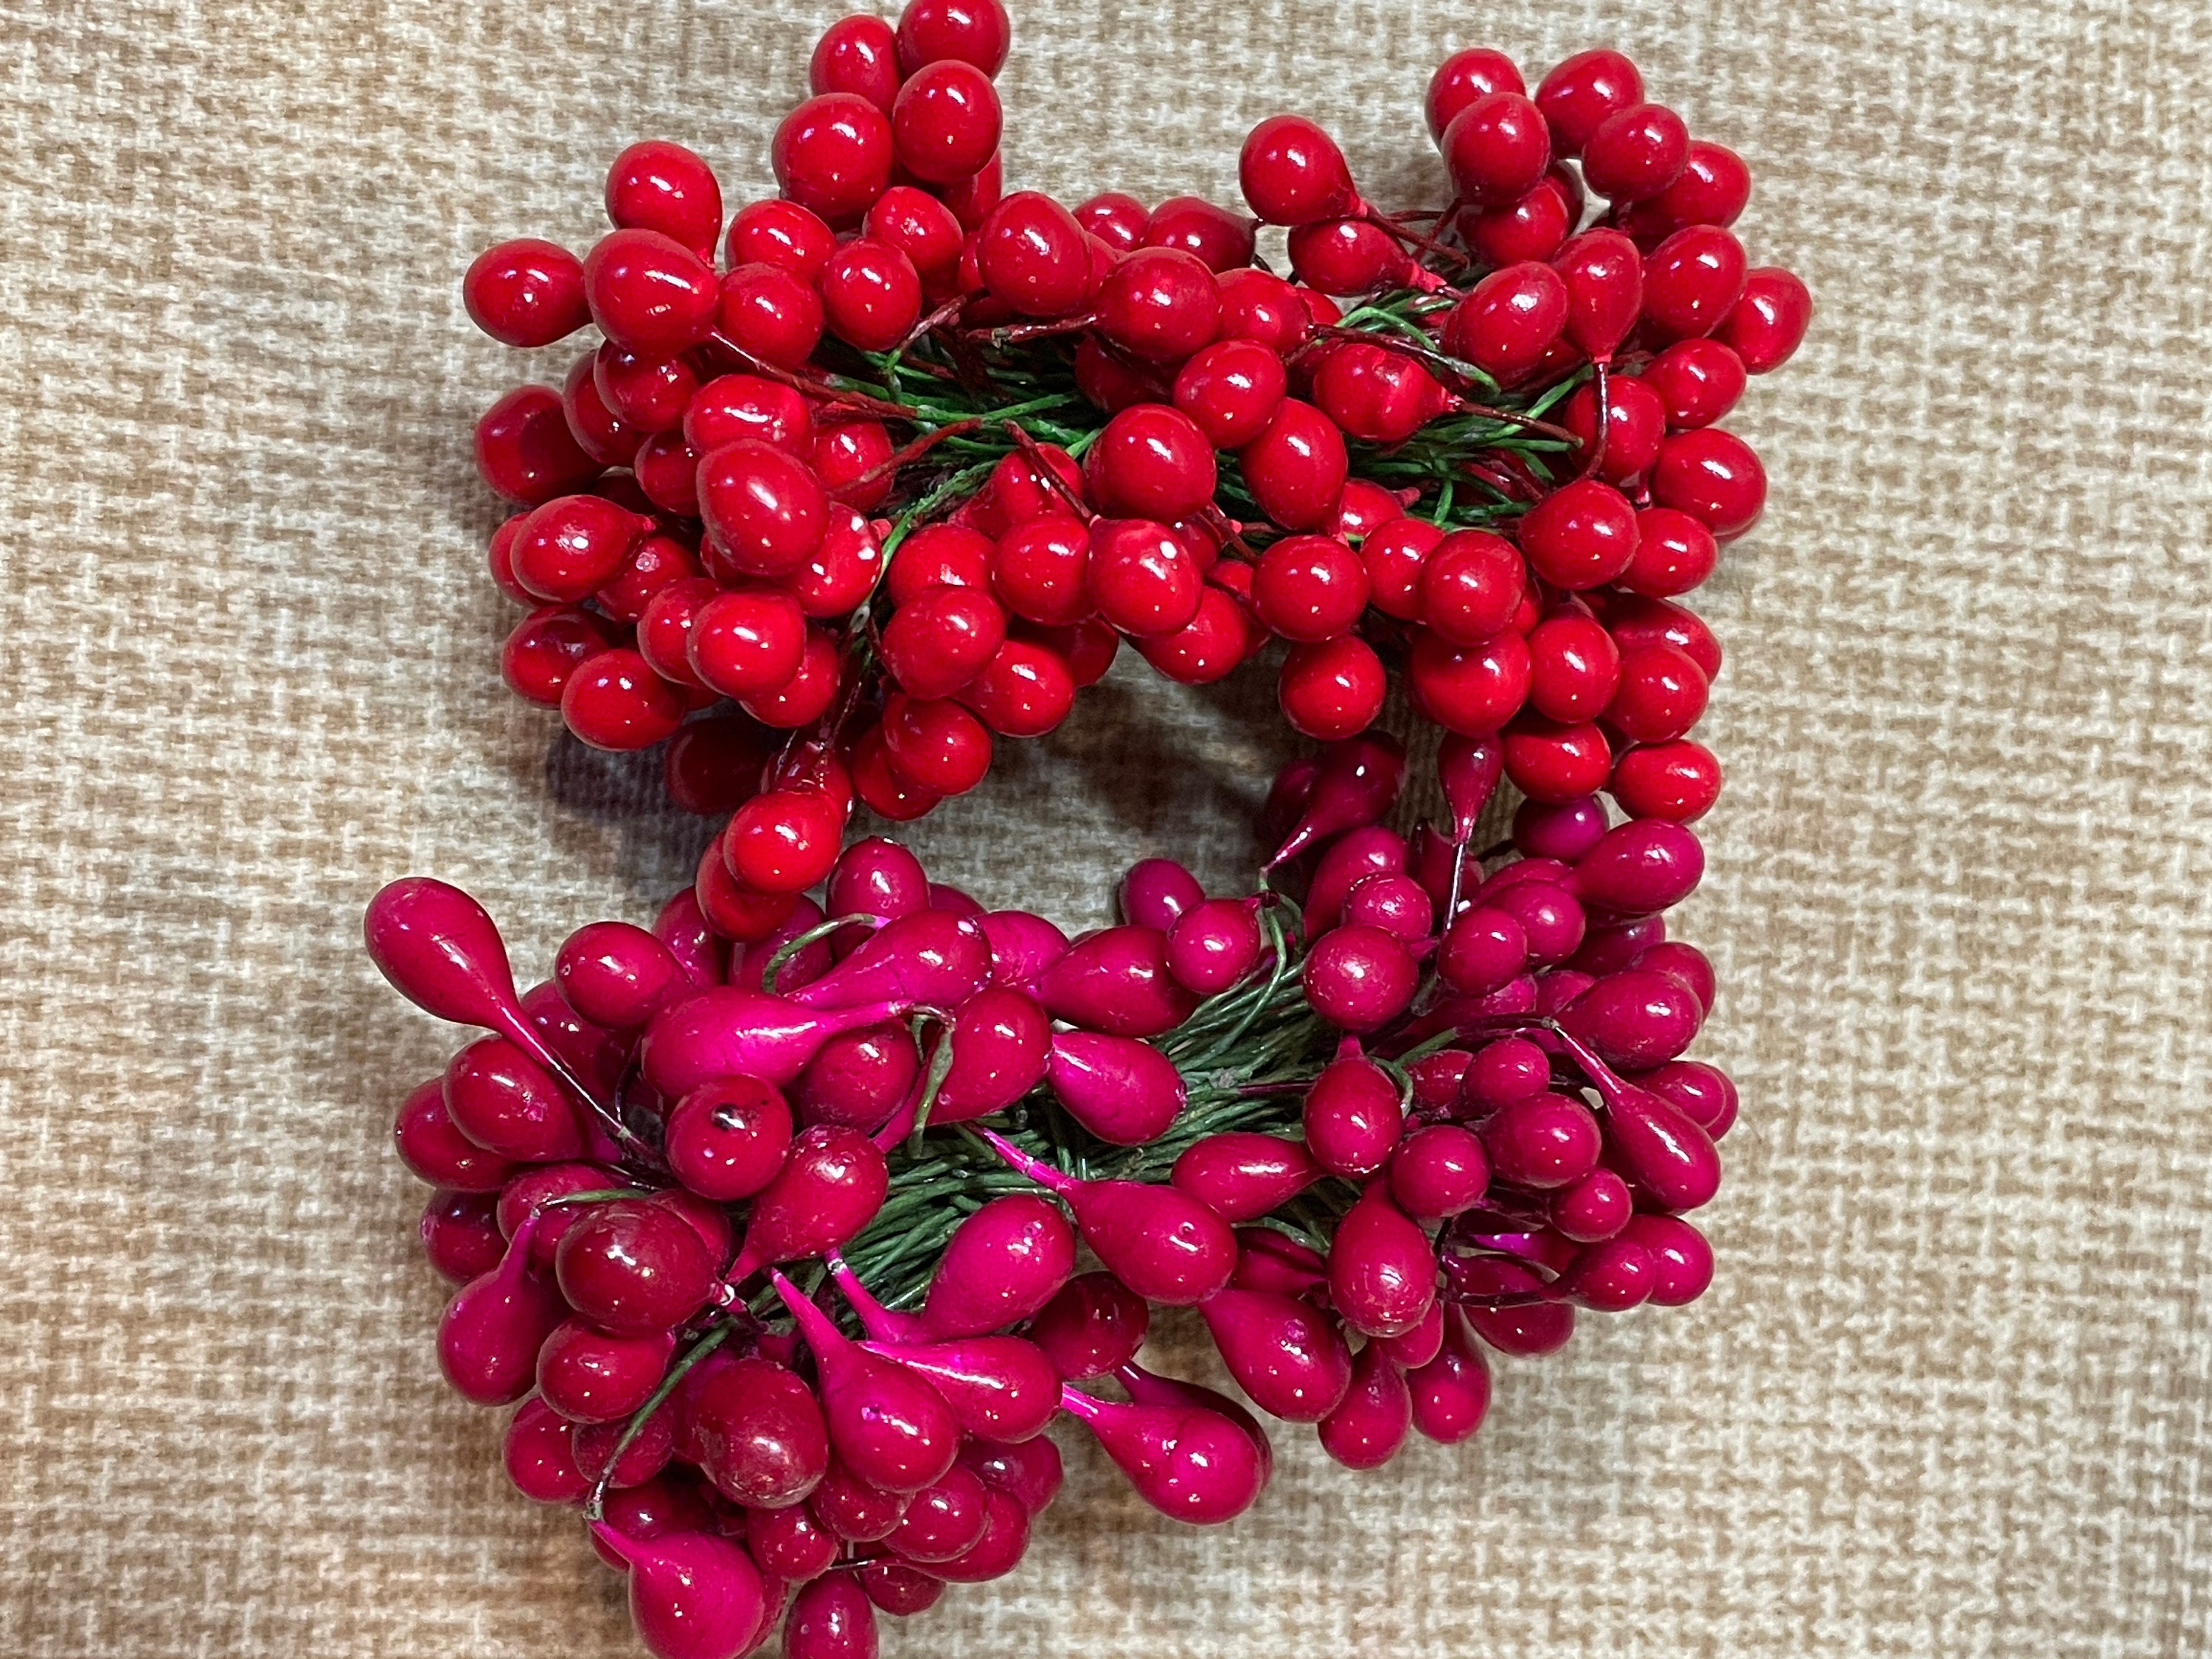 Holly Berry Stems Double-ended Red Berries on Wire Stems, 36 Pcs